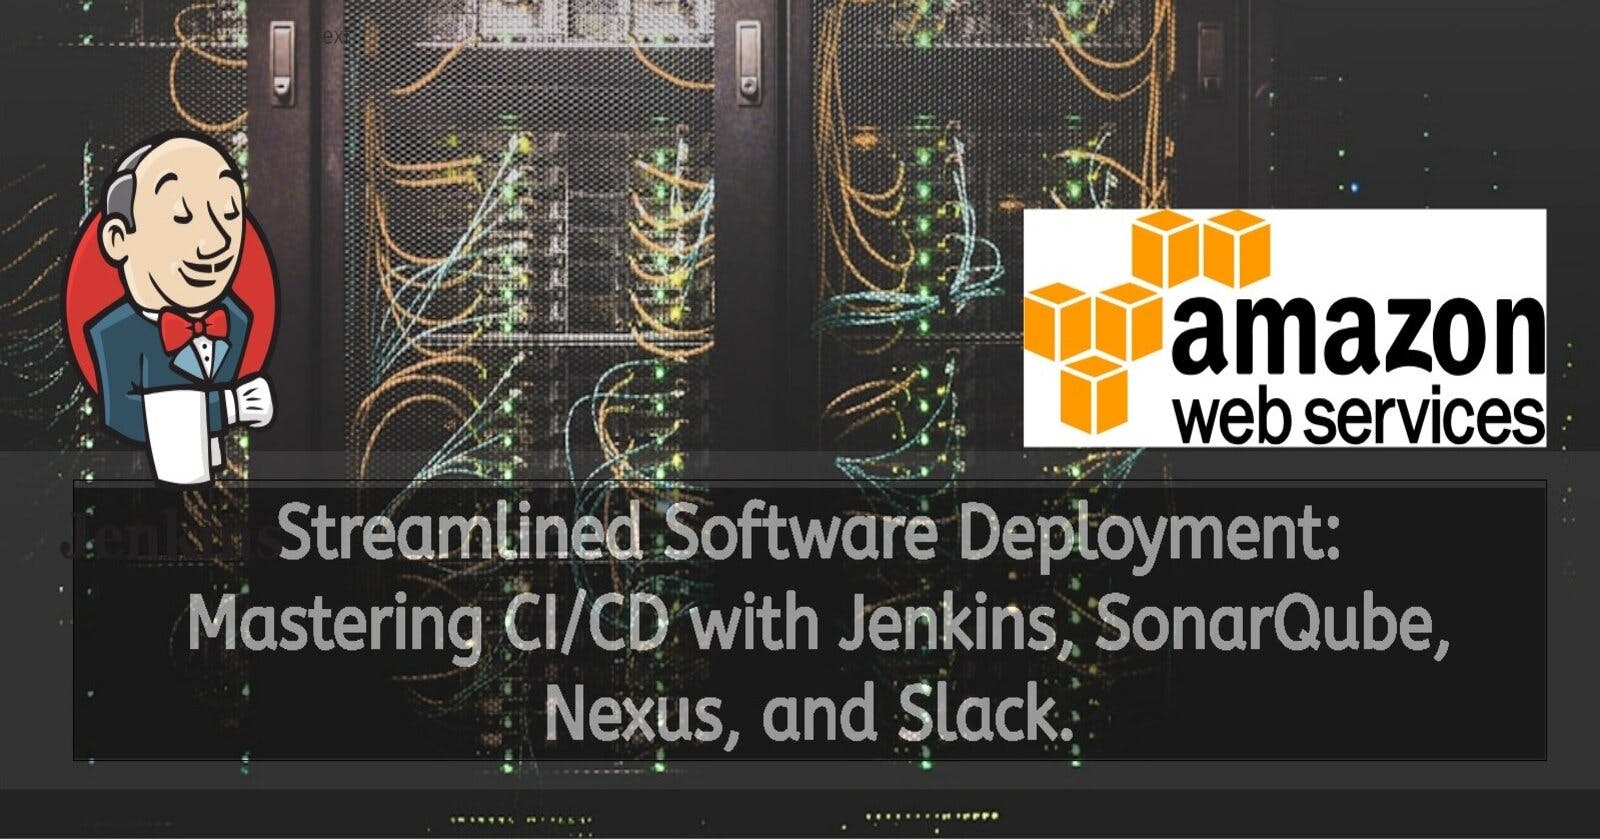 Streamlined Software Deployment: Mastering CI/CD with Jenkins, SonarQube, Nexus, and Slack.